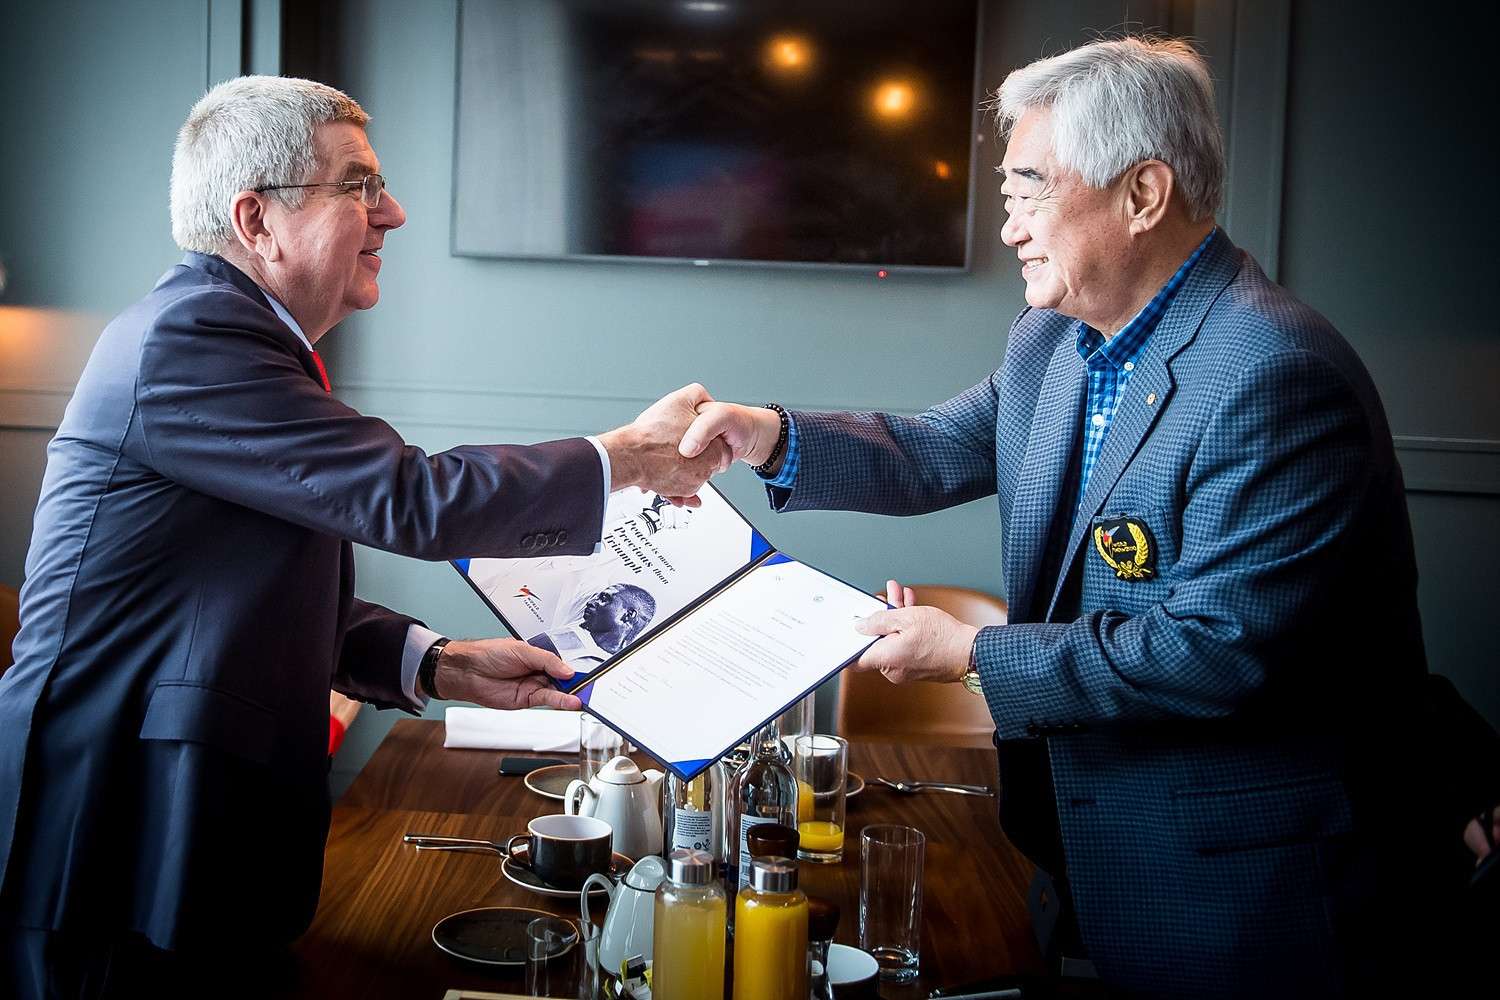 World Taekwondo President Chungwon Choue, pictured here with IOC counterpart Thomas Bach, said it is a "great honour" to receive the joint IOC and Dow "Carbon Initiative Award" ©World Taekwondo